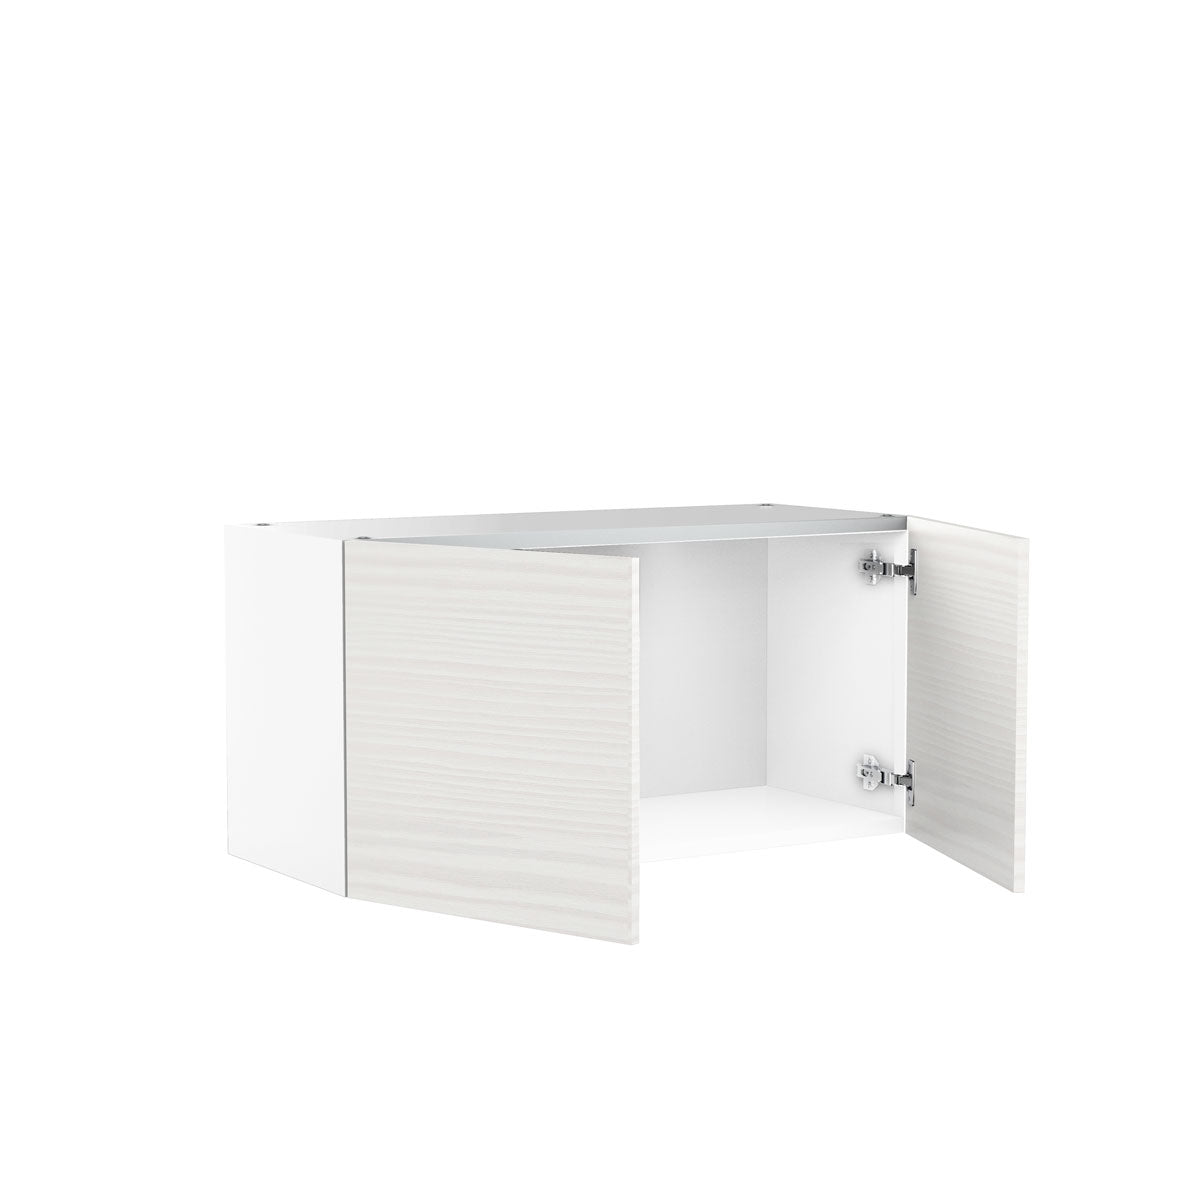 RTA - Pale Pine - Double Door Wall Cabinets | 33"W x 15"H x 12"D